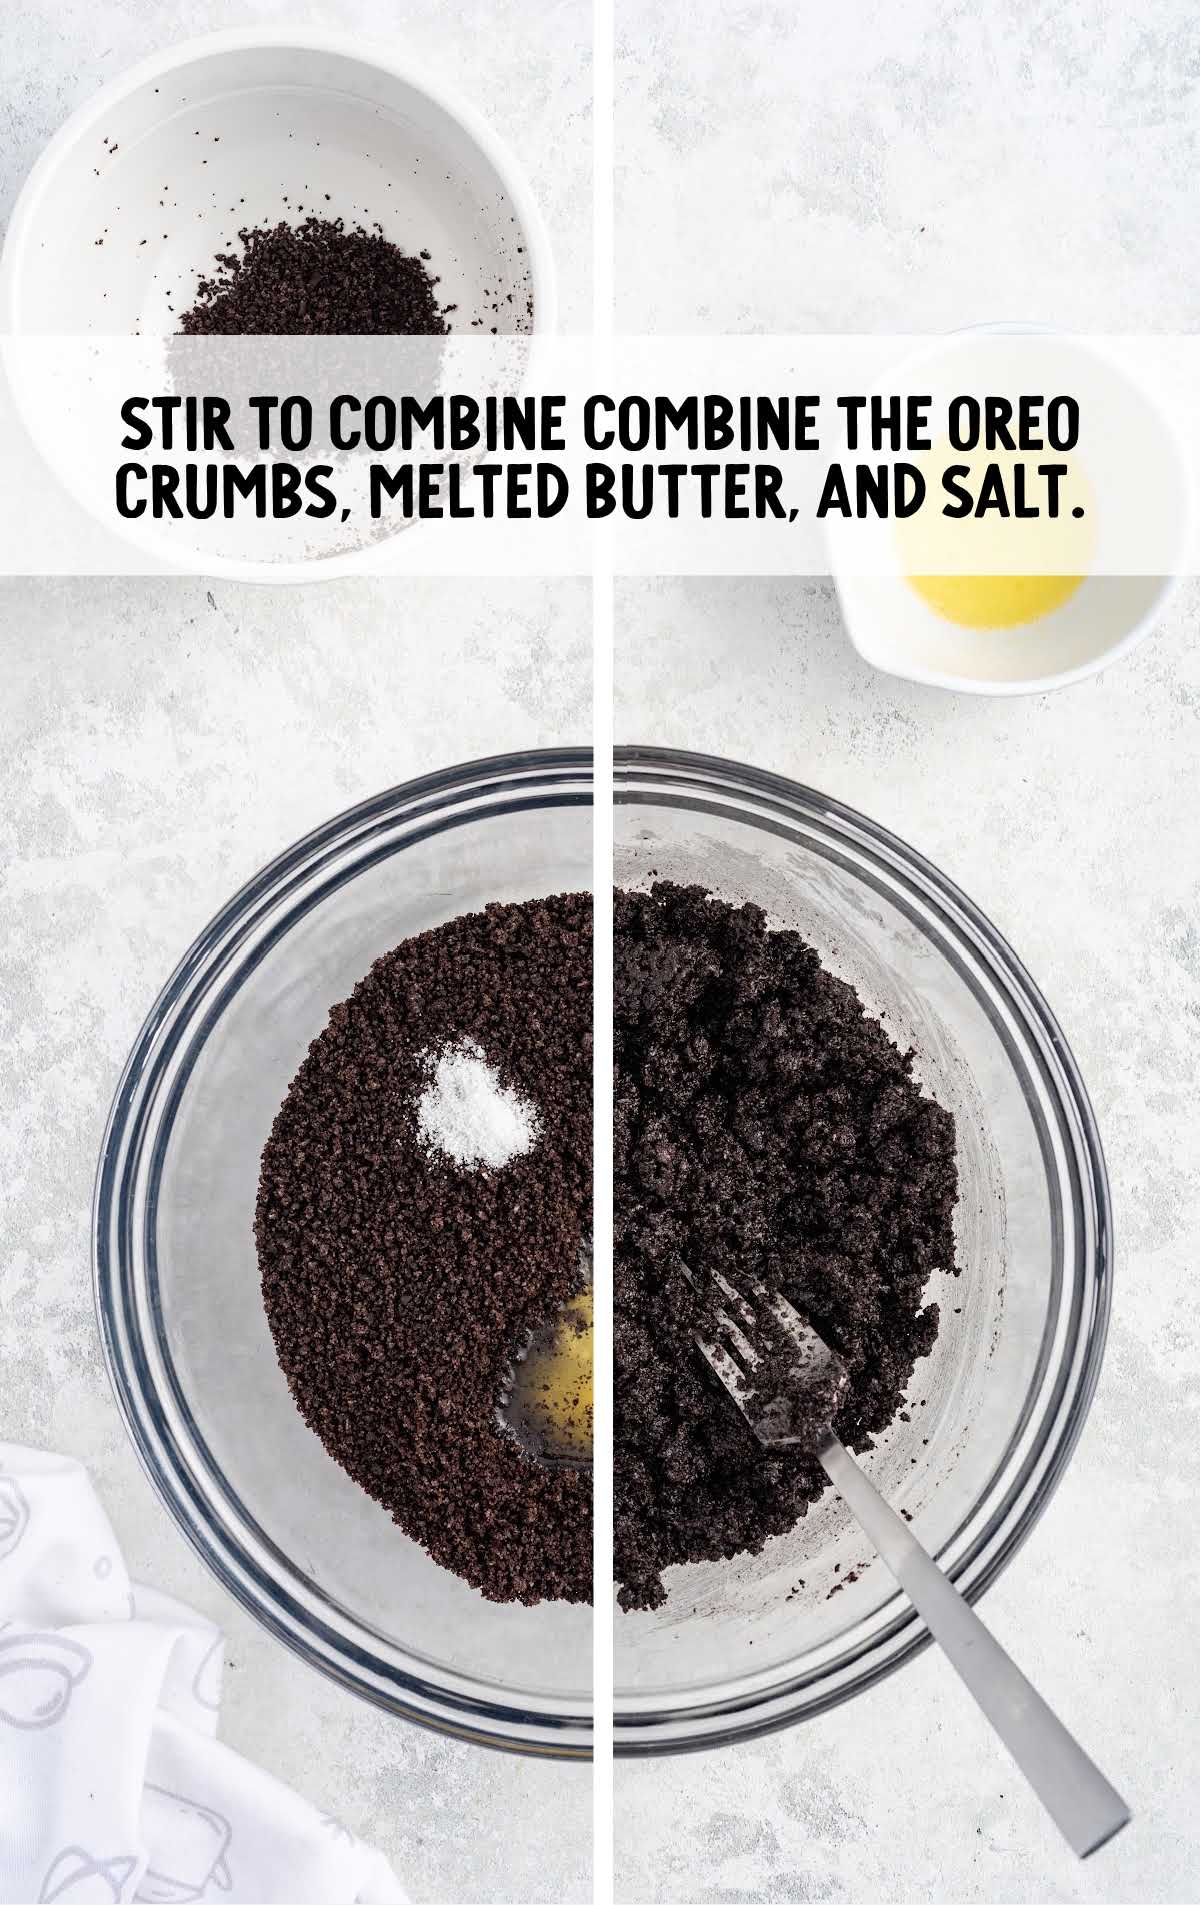 oreo crumbs, melted butter and salt stirred in a bowl